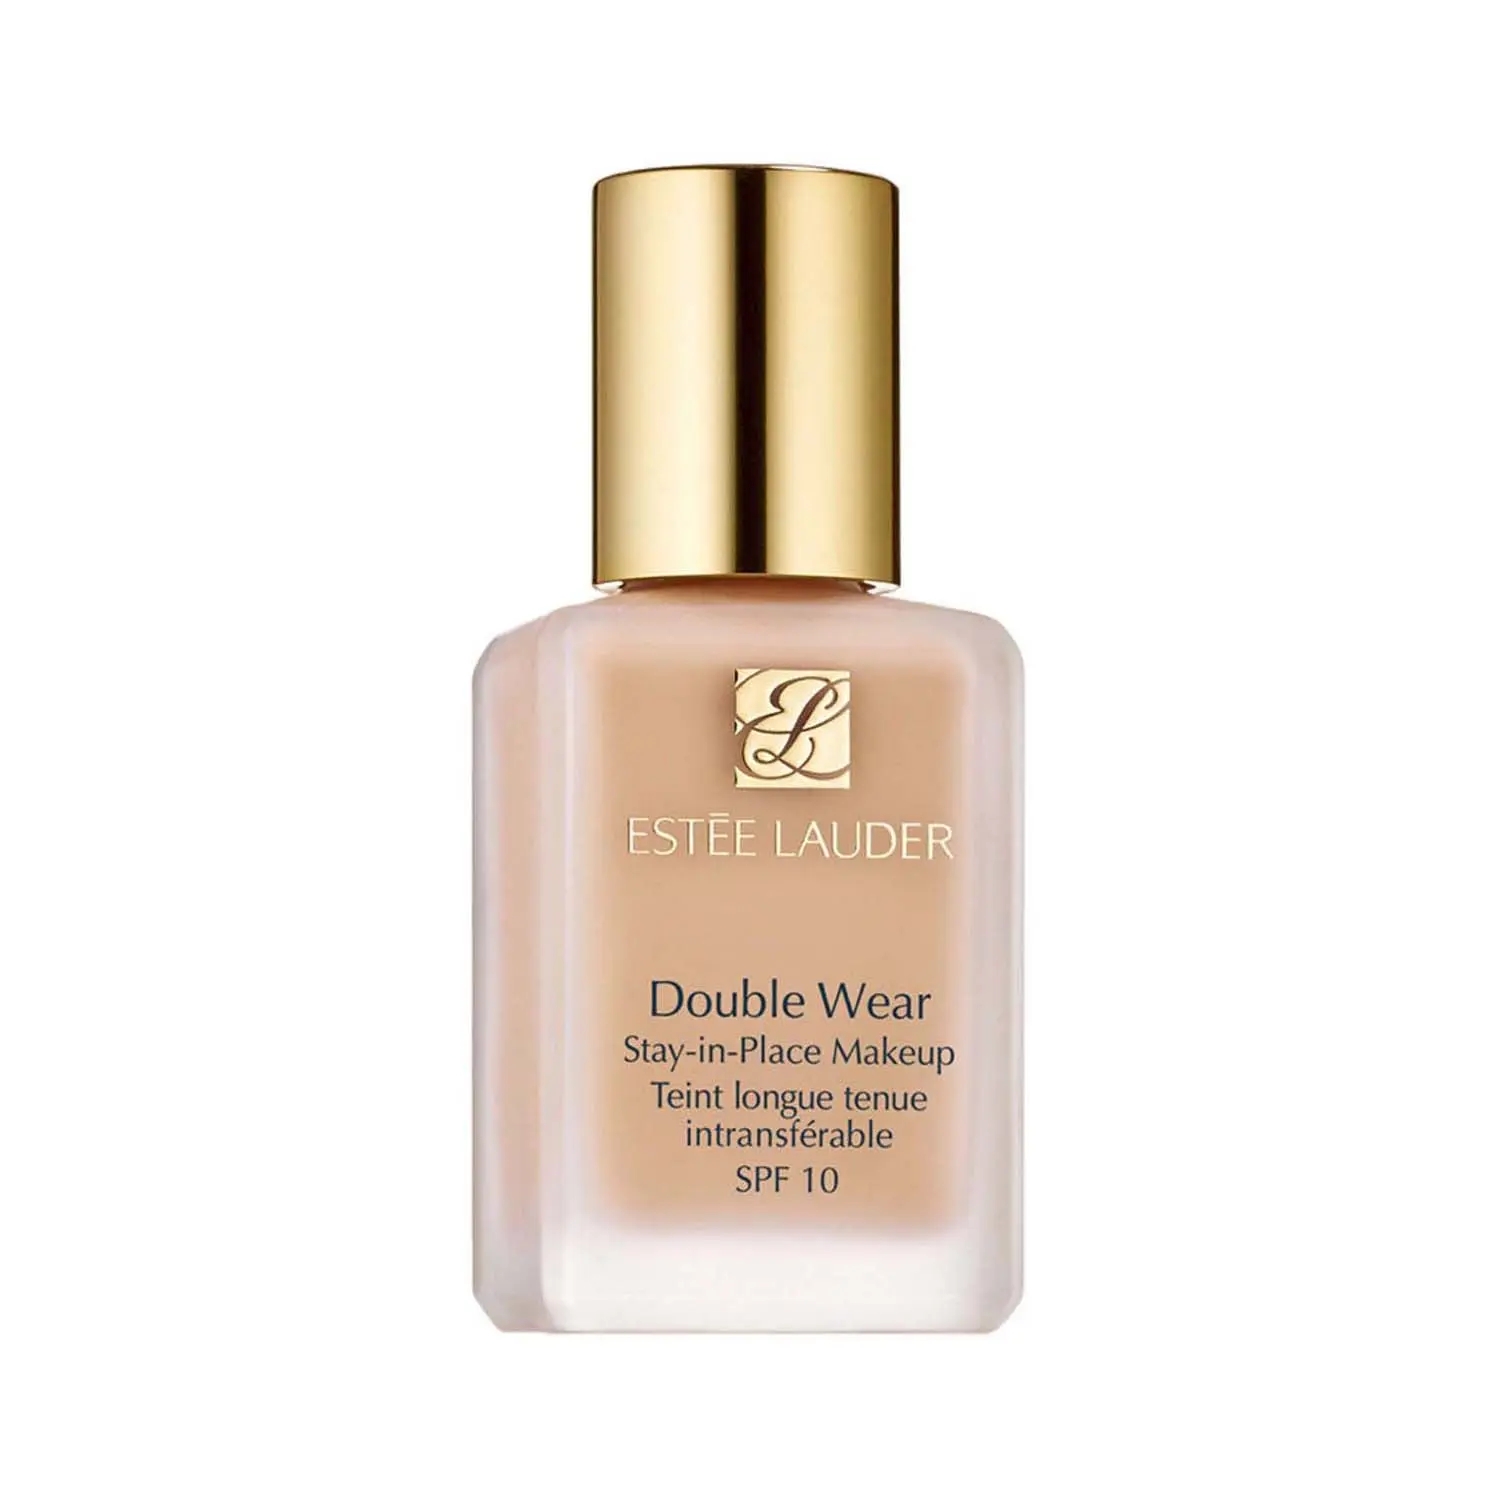 Estee Lauder | Estee Lauder Double Wear Stay-In-Place Makeup Foundation SPF 10 - 1C0 Shell (30ml)